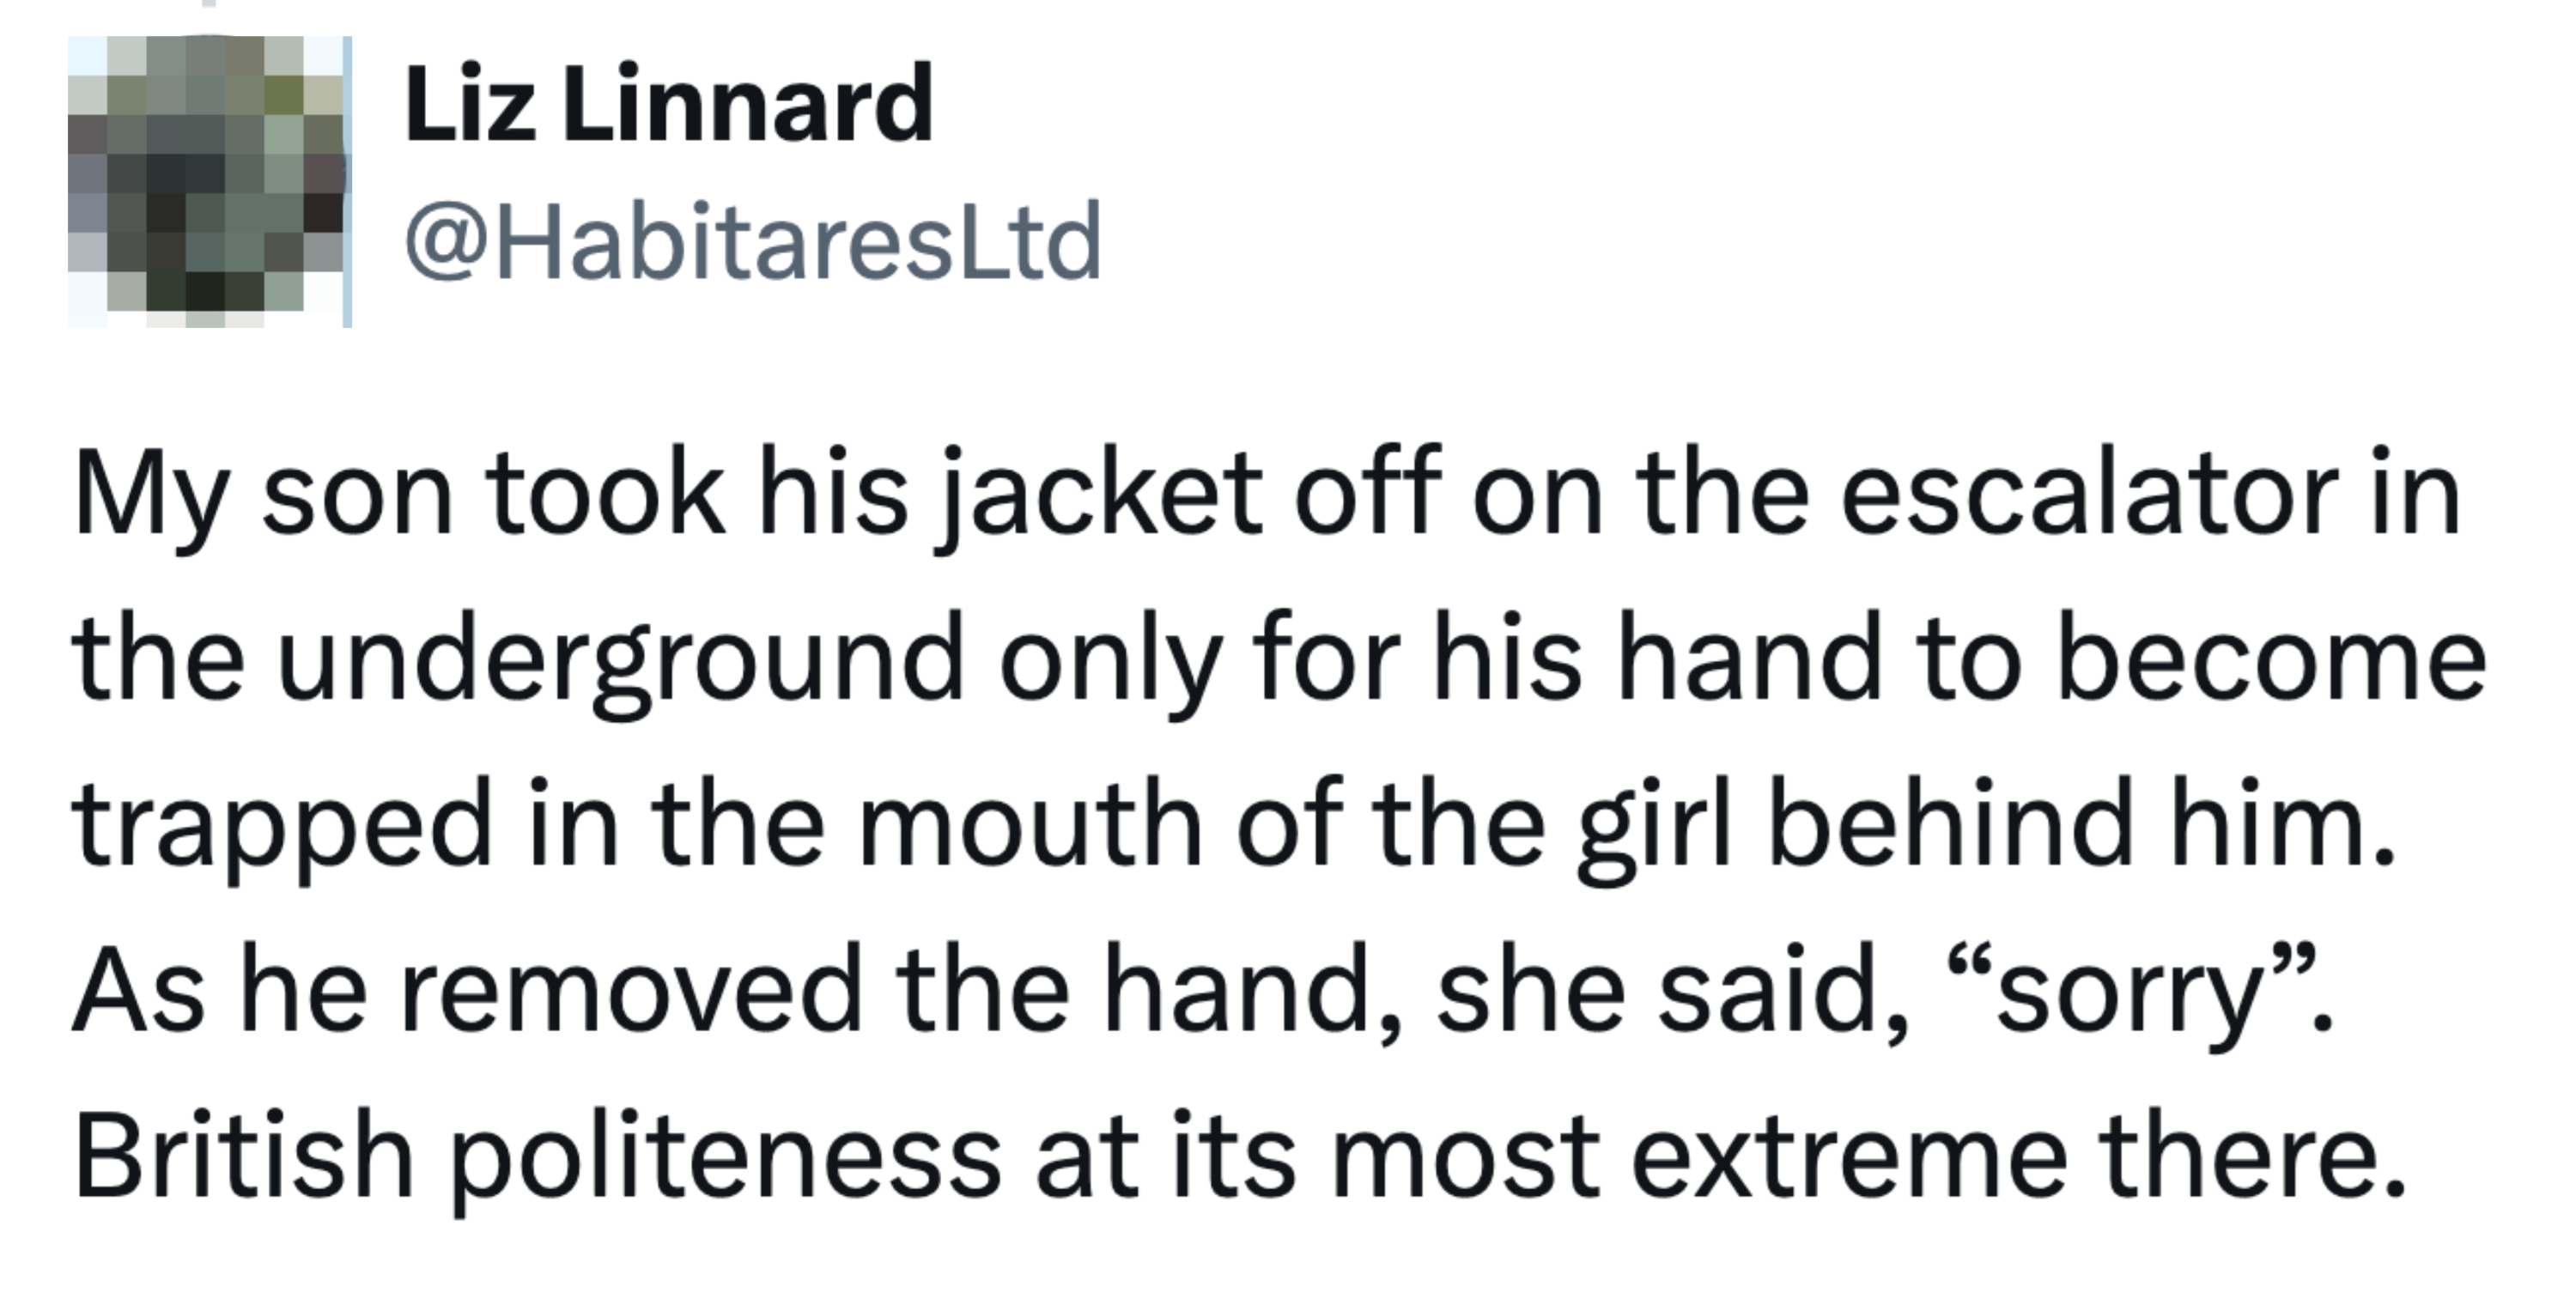 Tweet describes a humorous situation where a boy&#x27;s hand got trapped in a girl&#x27;s mouth when he took off his jacket on an escalator, and she apologized